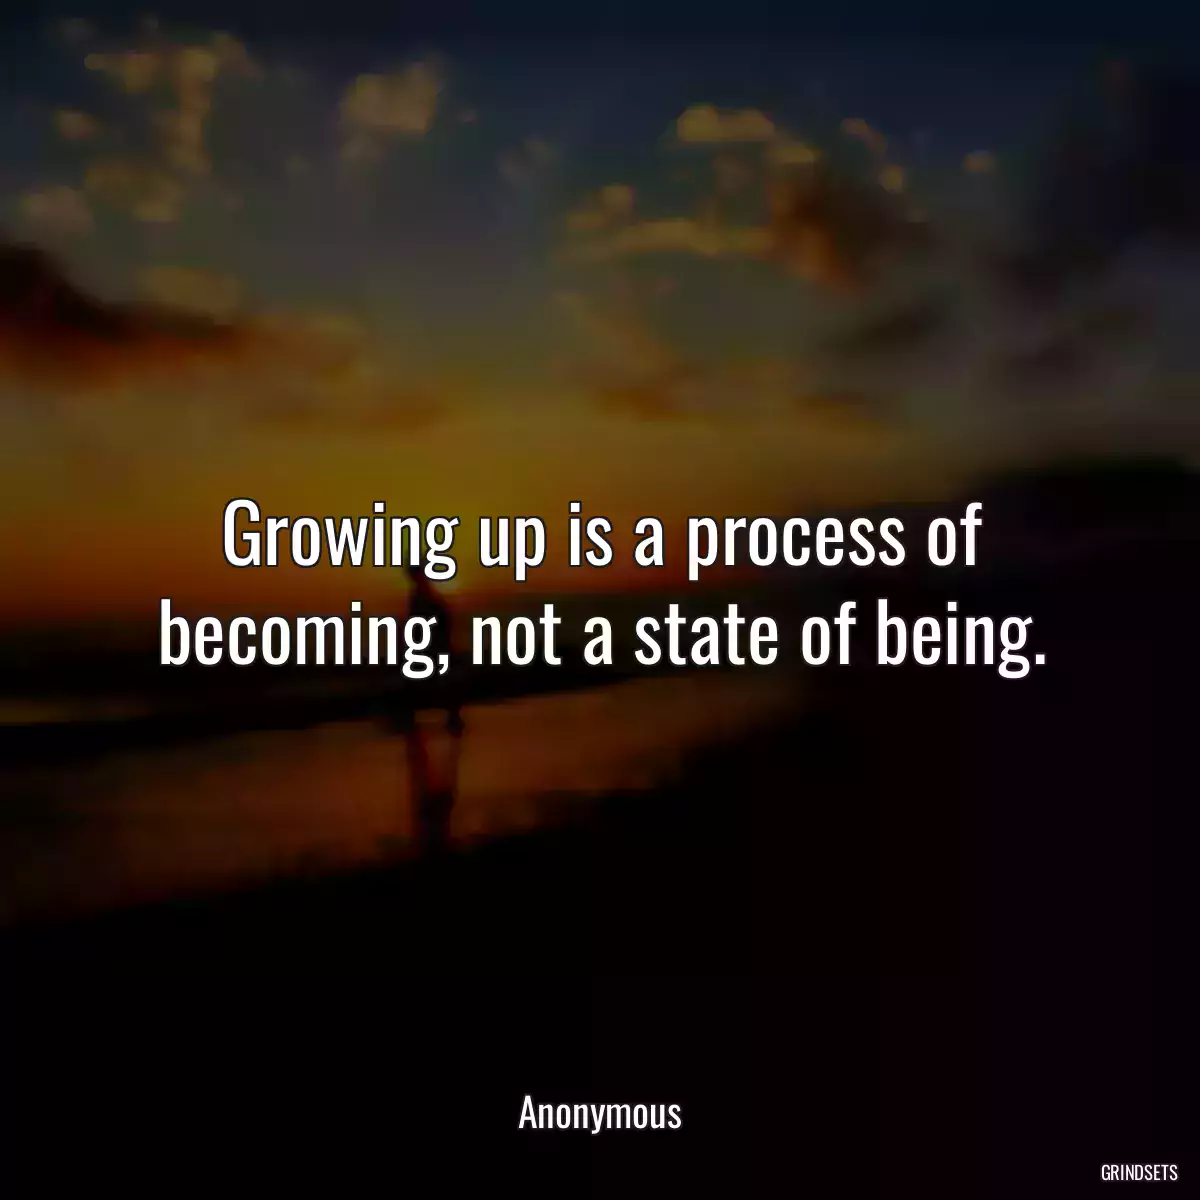 Growing up is a process of becoming, not a state of being.